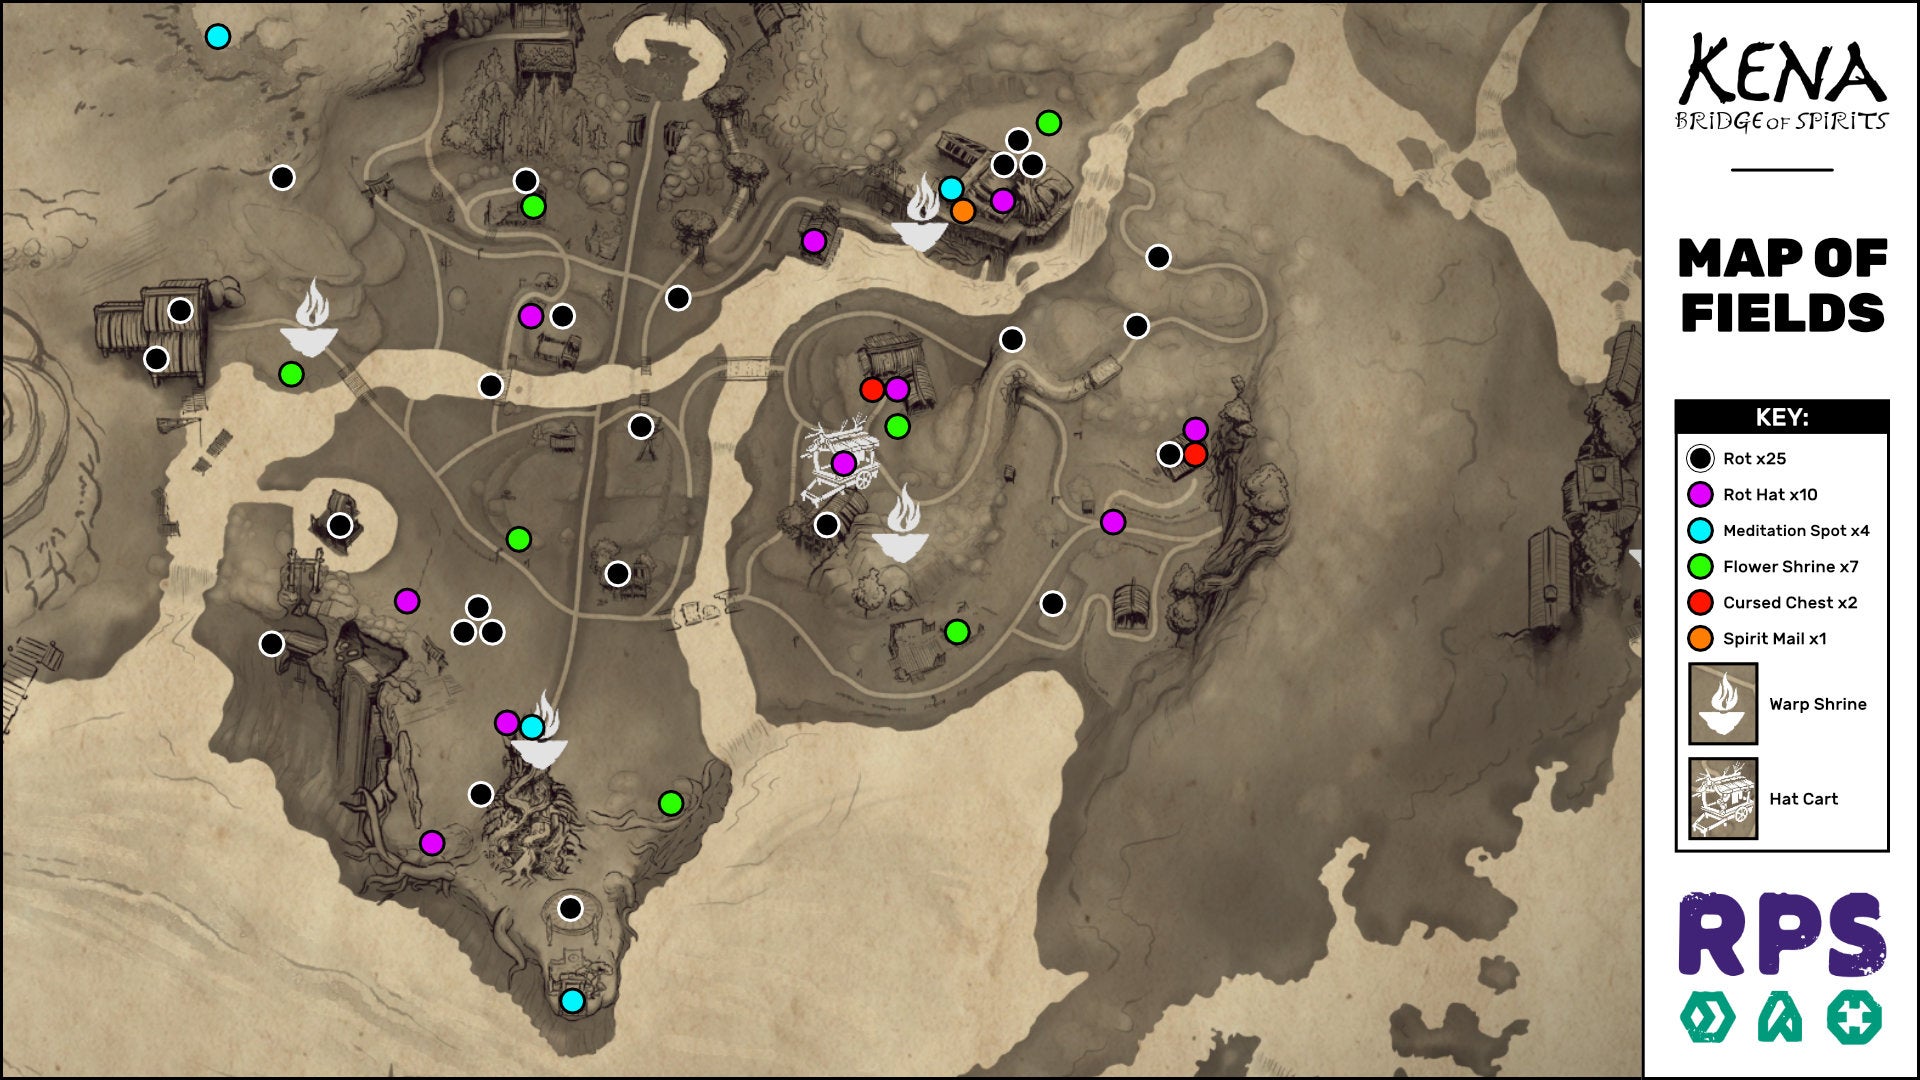 A map of the Fields area of Kena: Bridge Of Spirits with all collectible locations marked.